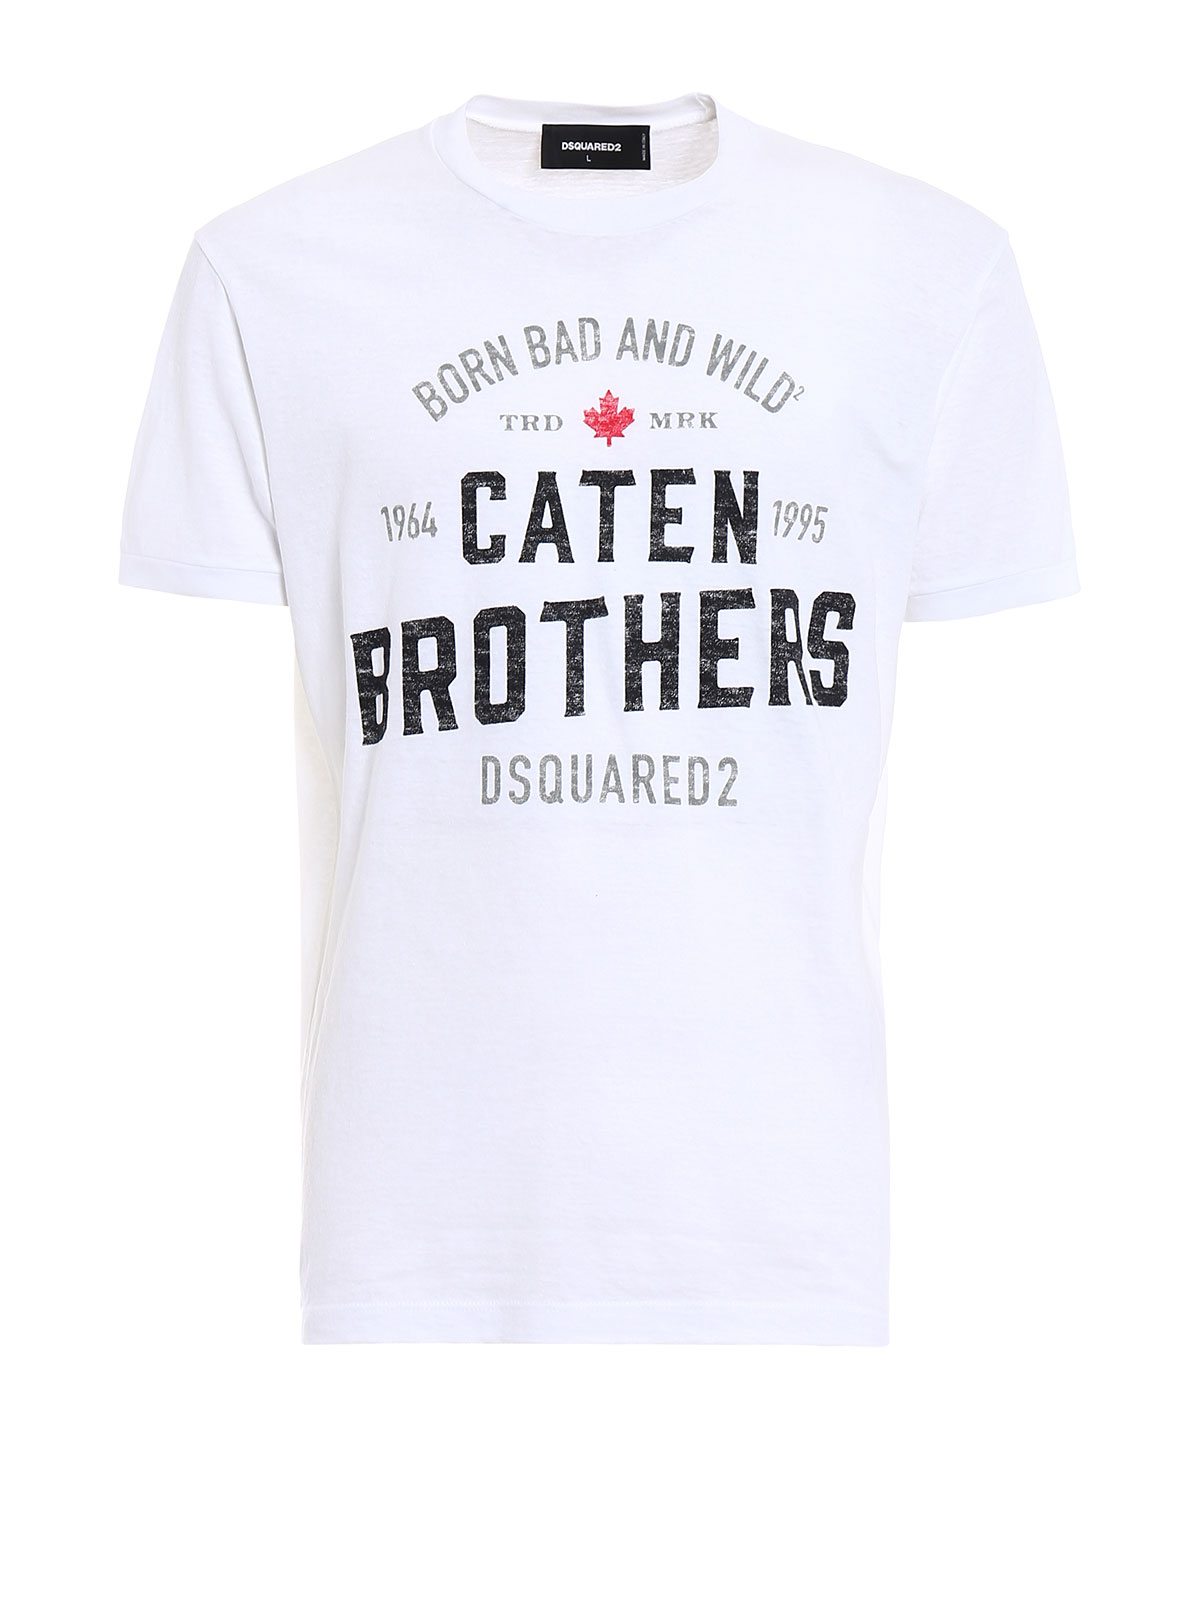 dsquared caten brothers shirt